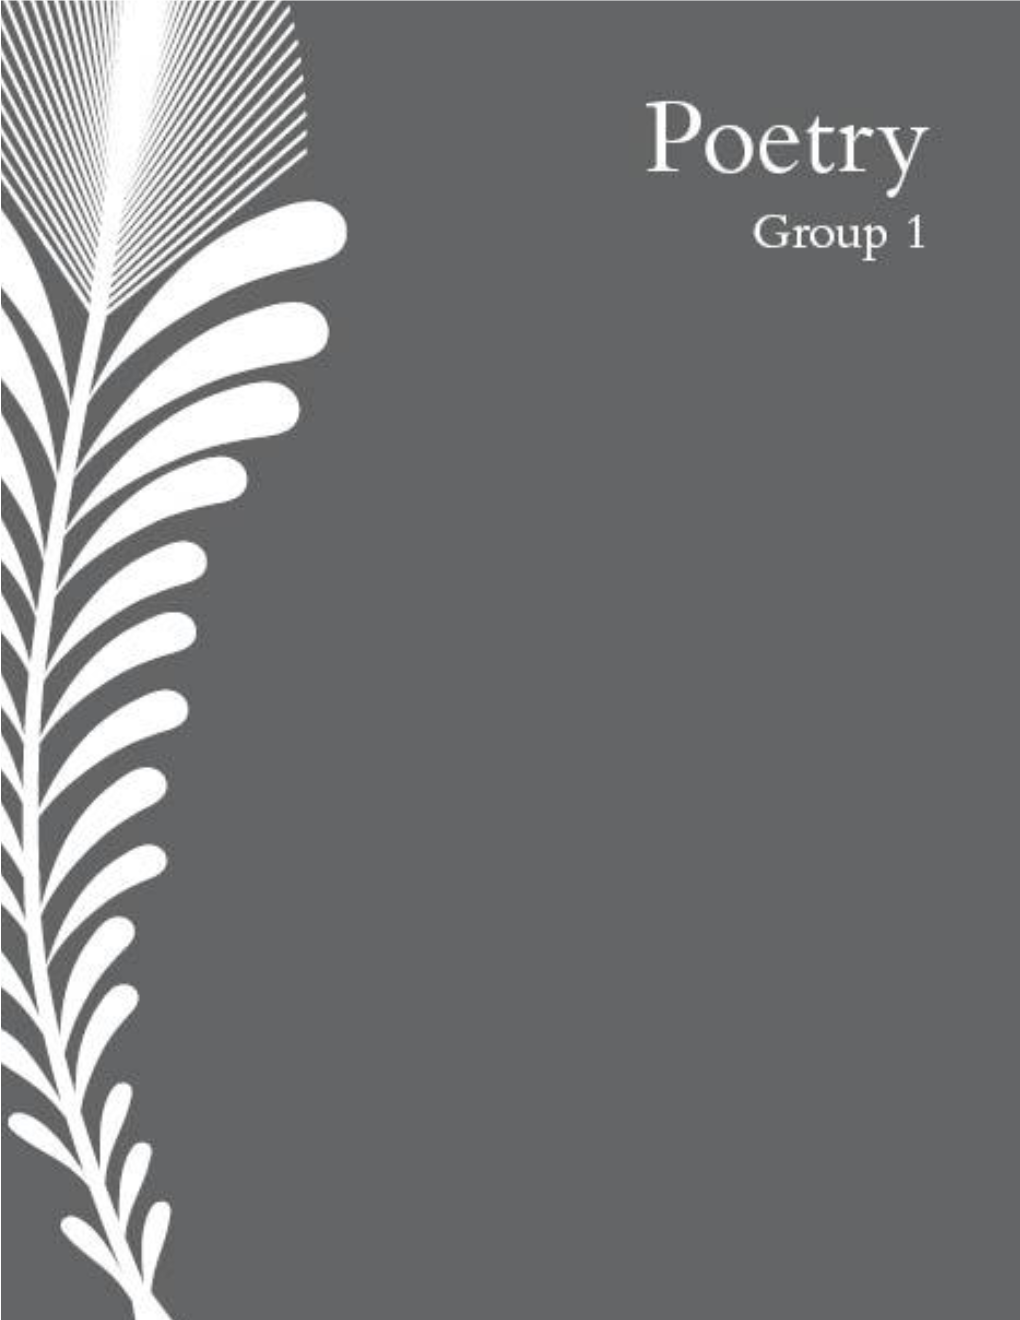 Poetry Group